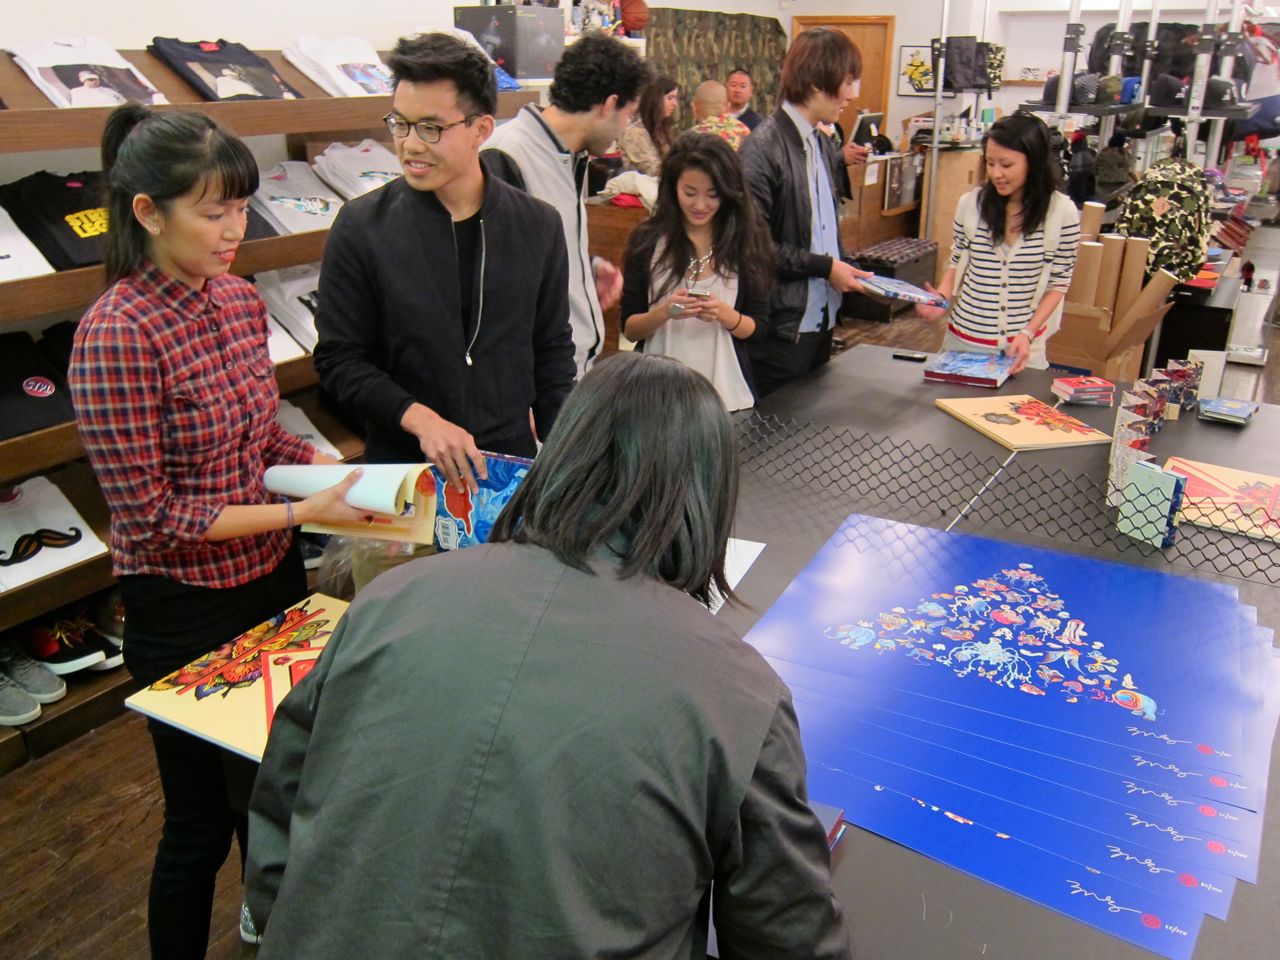 James Jean Reed Space signing AM 10